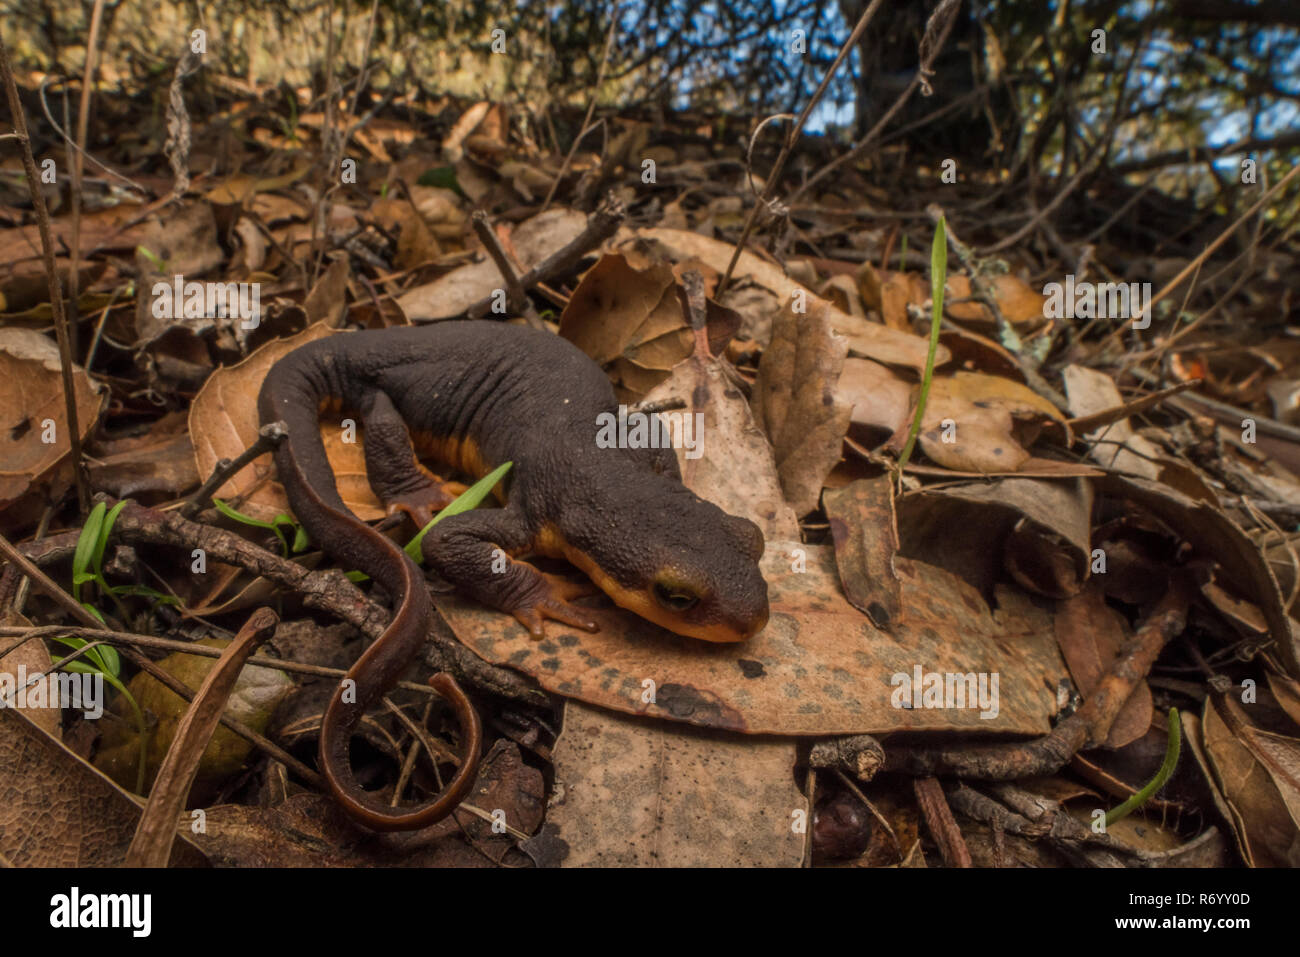 The California newt endemic to the west coast is known for producing a potent neurotoxin, tetrodotoxin. This helps protect it from predators. Stock Photo